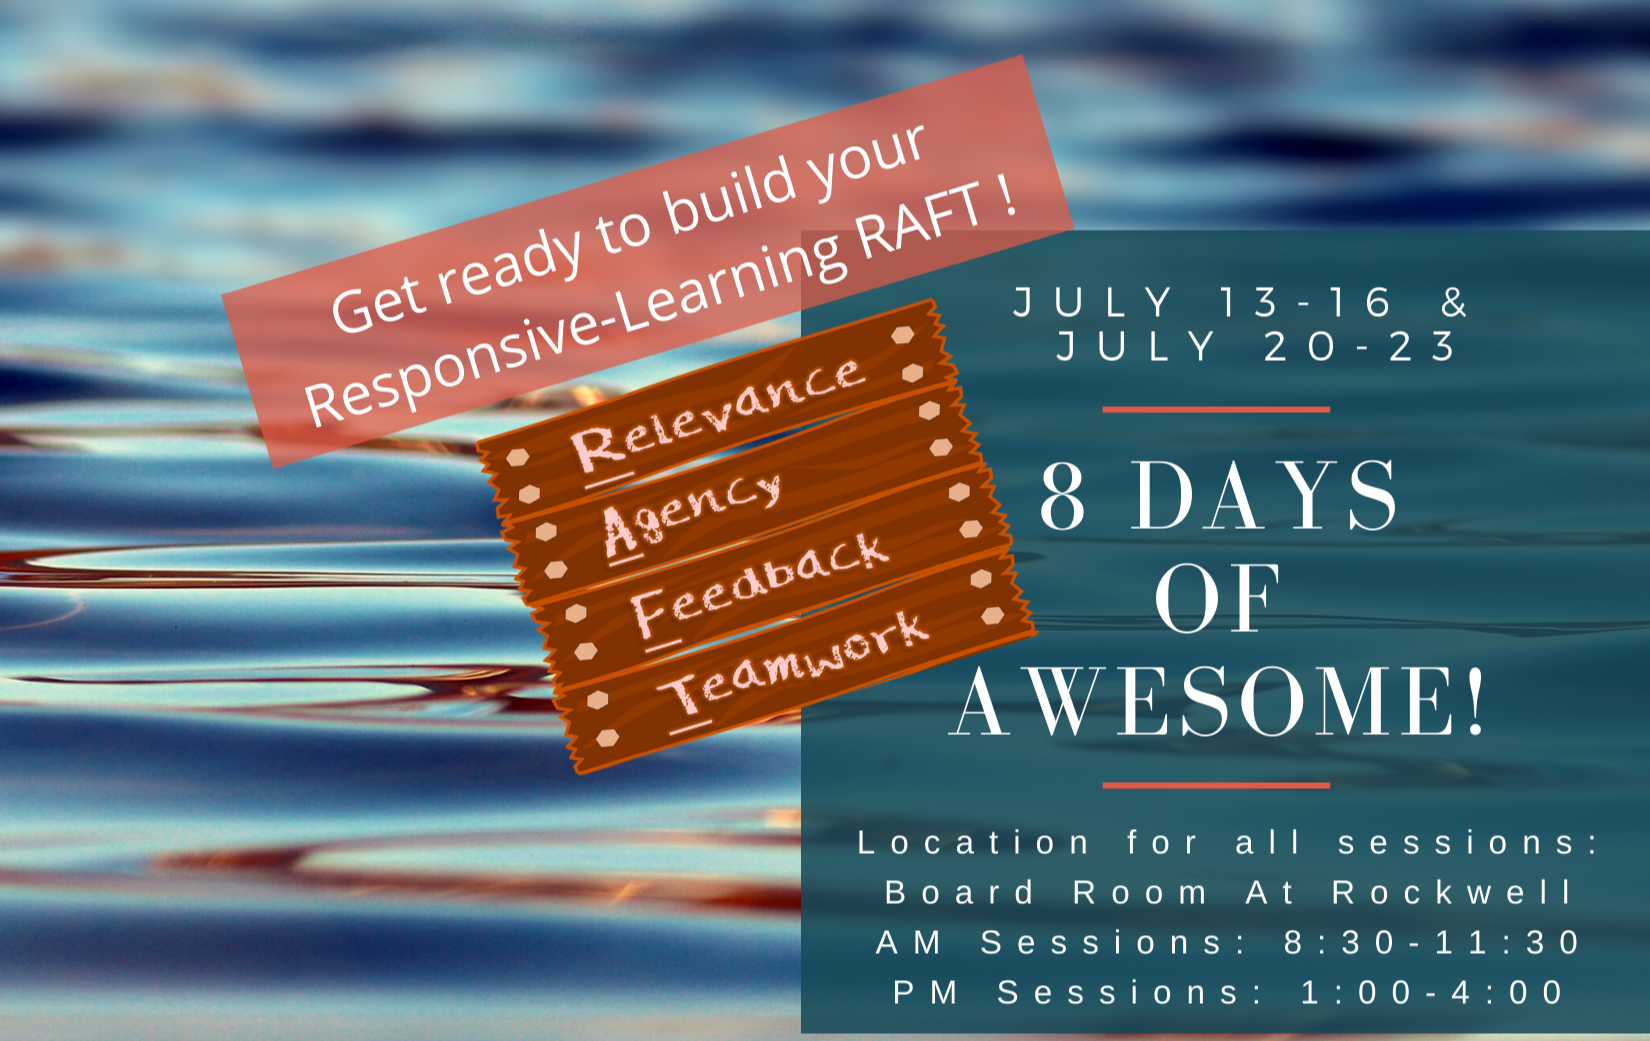 8 Days of Awesome - Build Your Responsive Learning RAFT